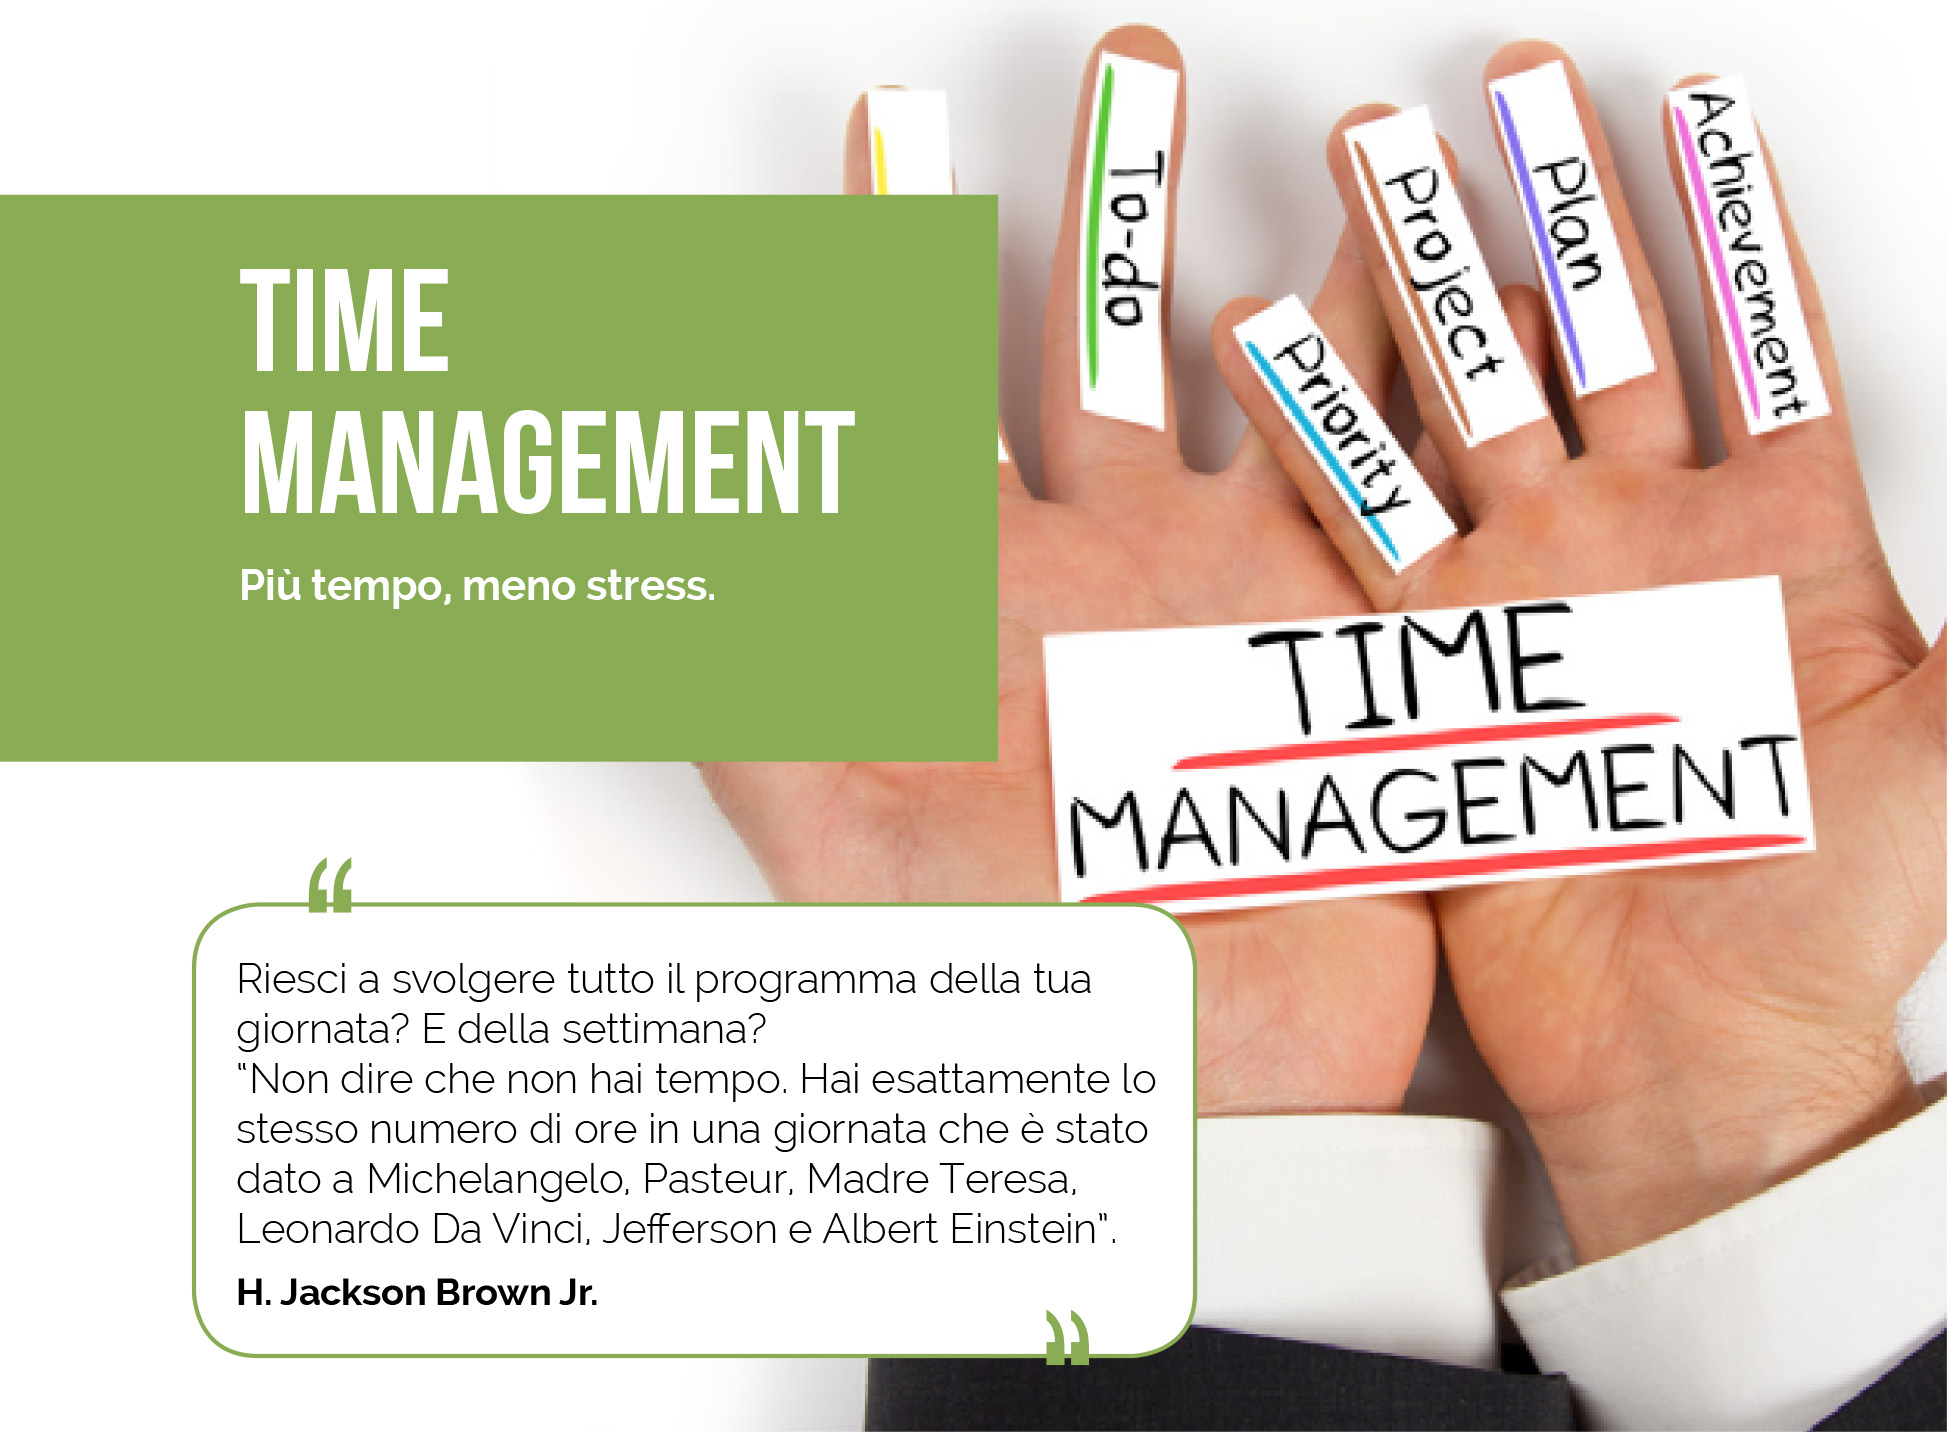 //www.ziomike.it/wp-content/uploads/2021/04/time_management.jpg